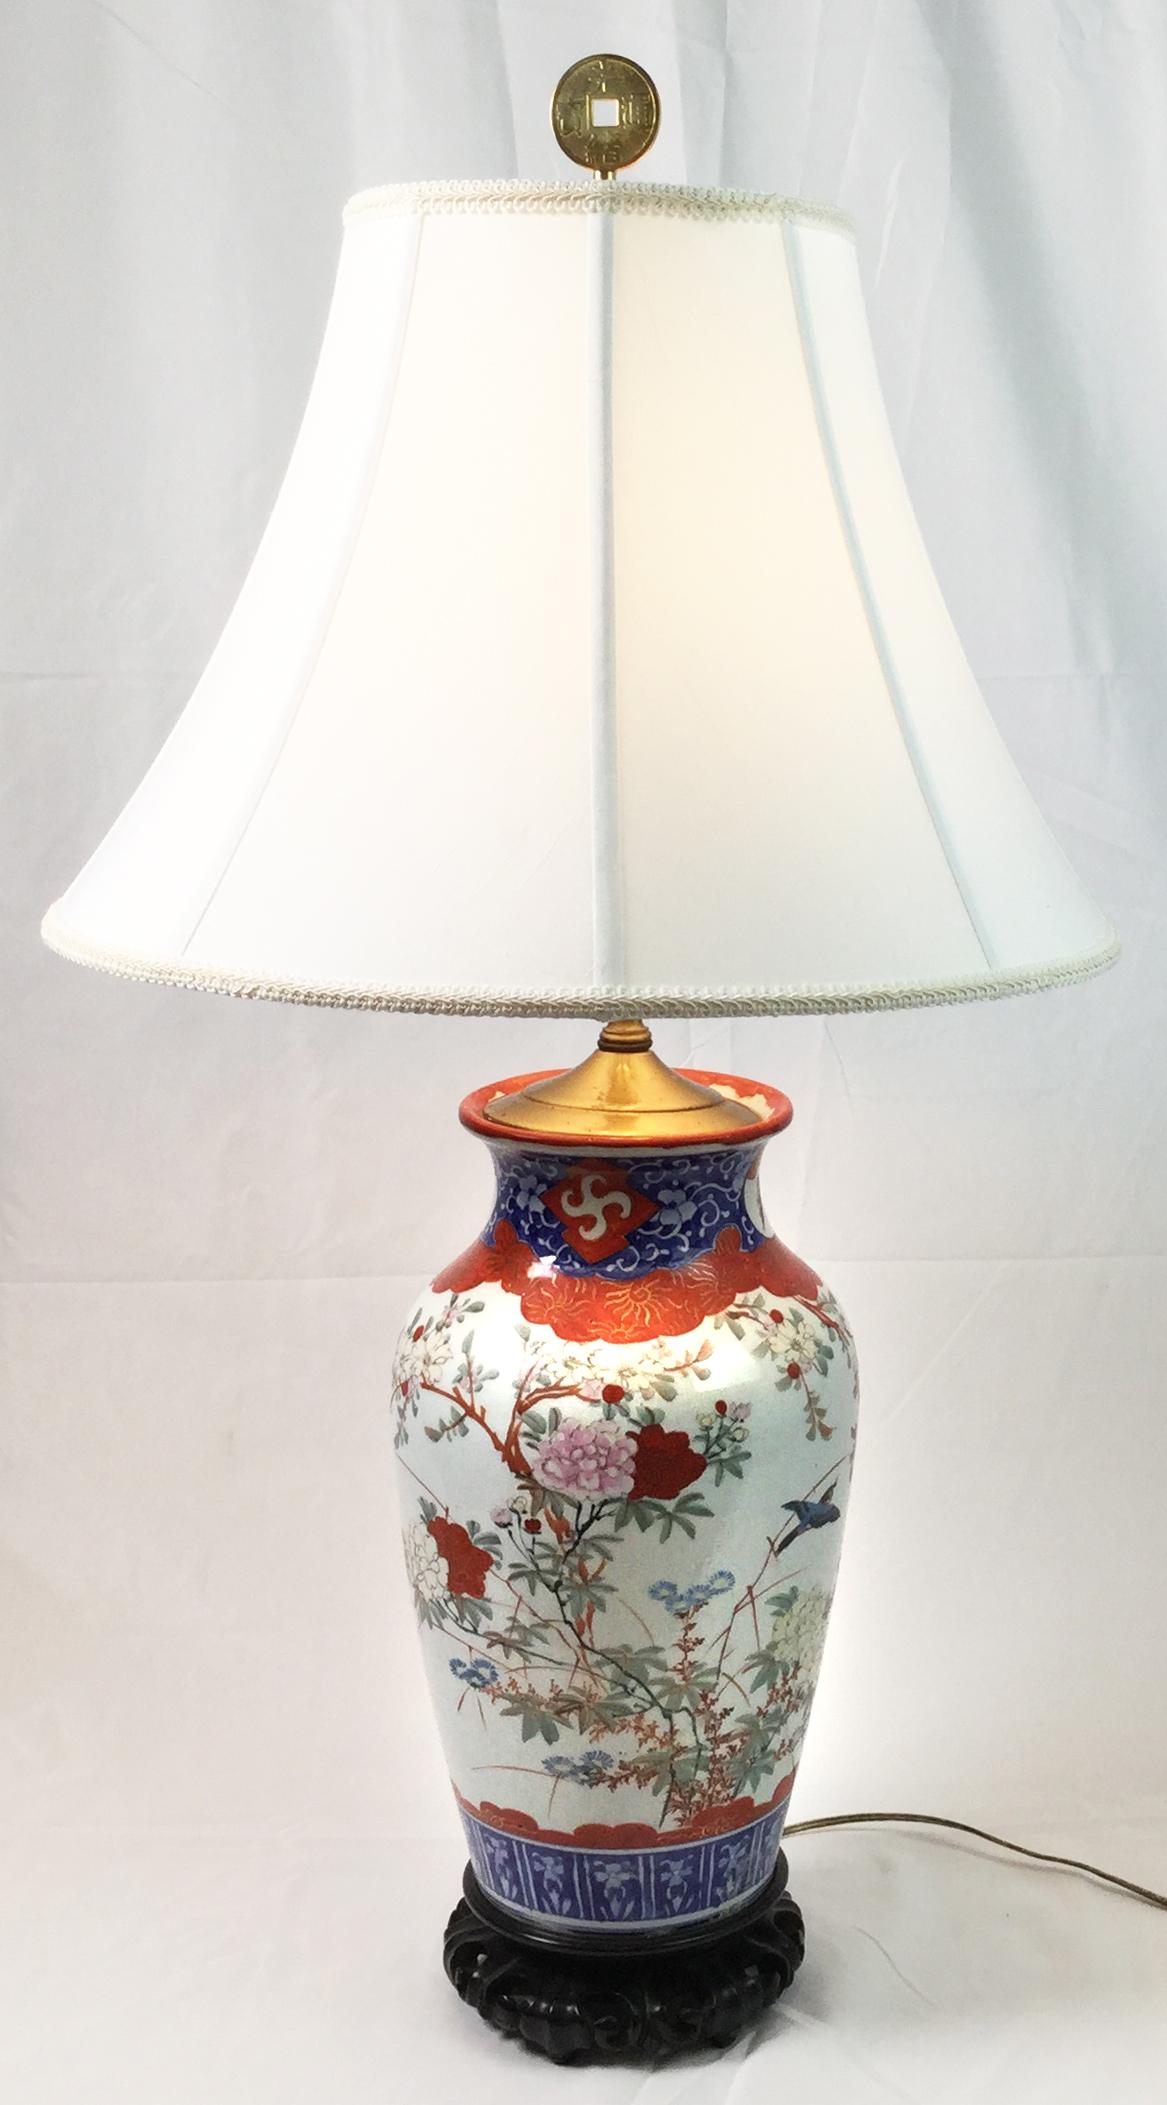 A pair of hand painted Chinese porcelain lamps with decoration of birds, flowers and branches on a white porcelain background . The shades are for photographic purposes only, not included. The total height with a shade is 32 inches, to the top of